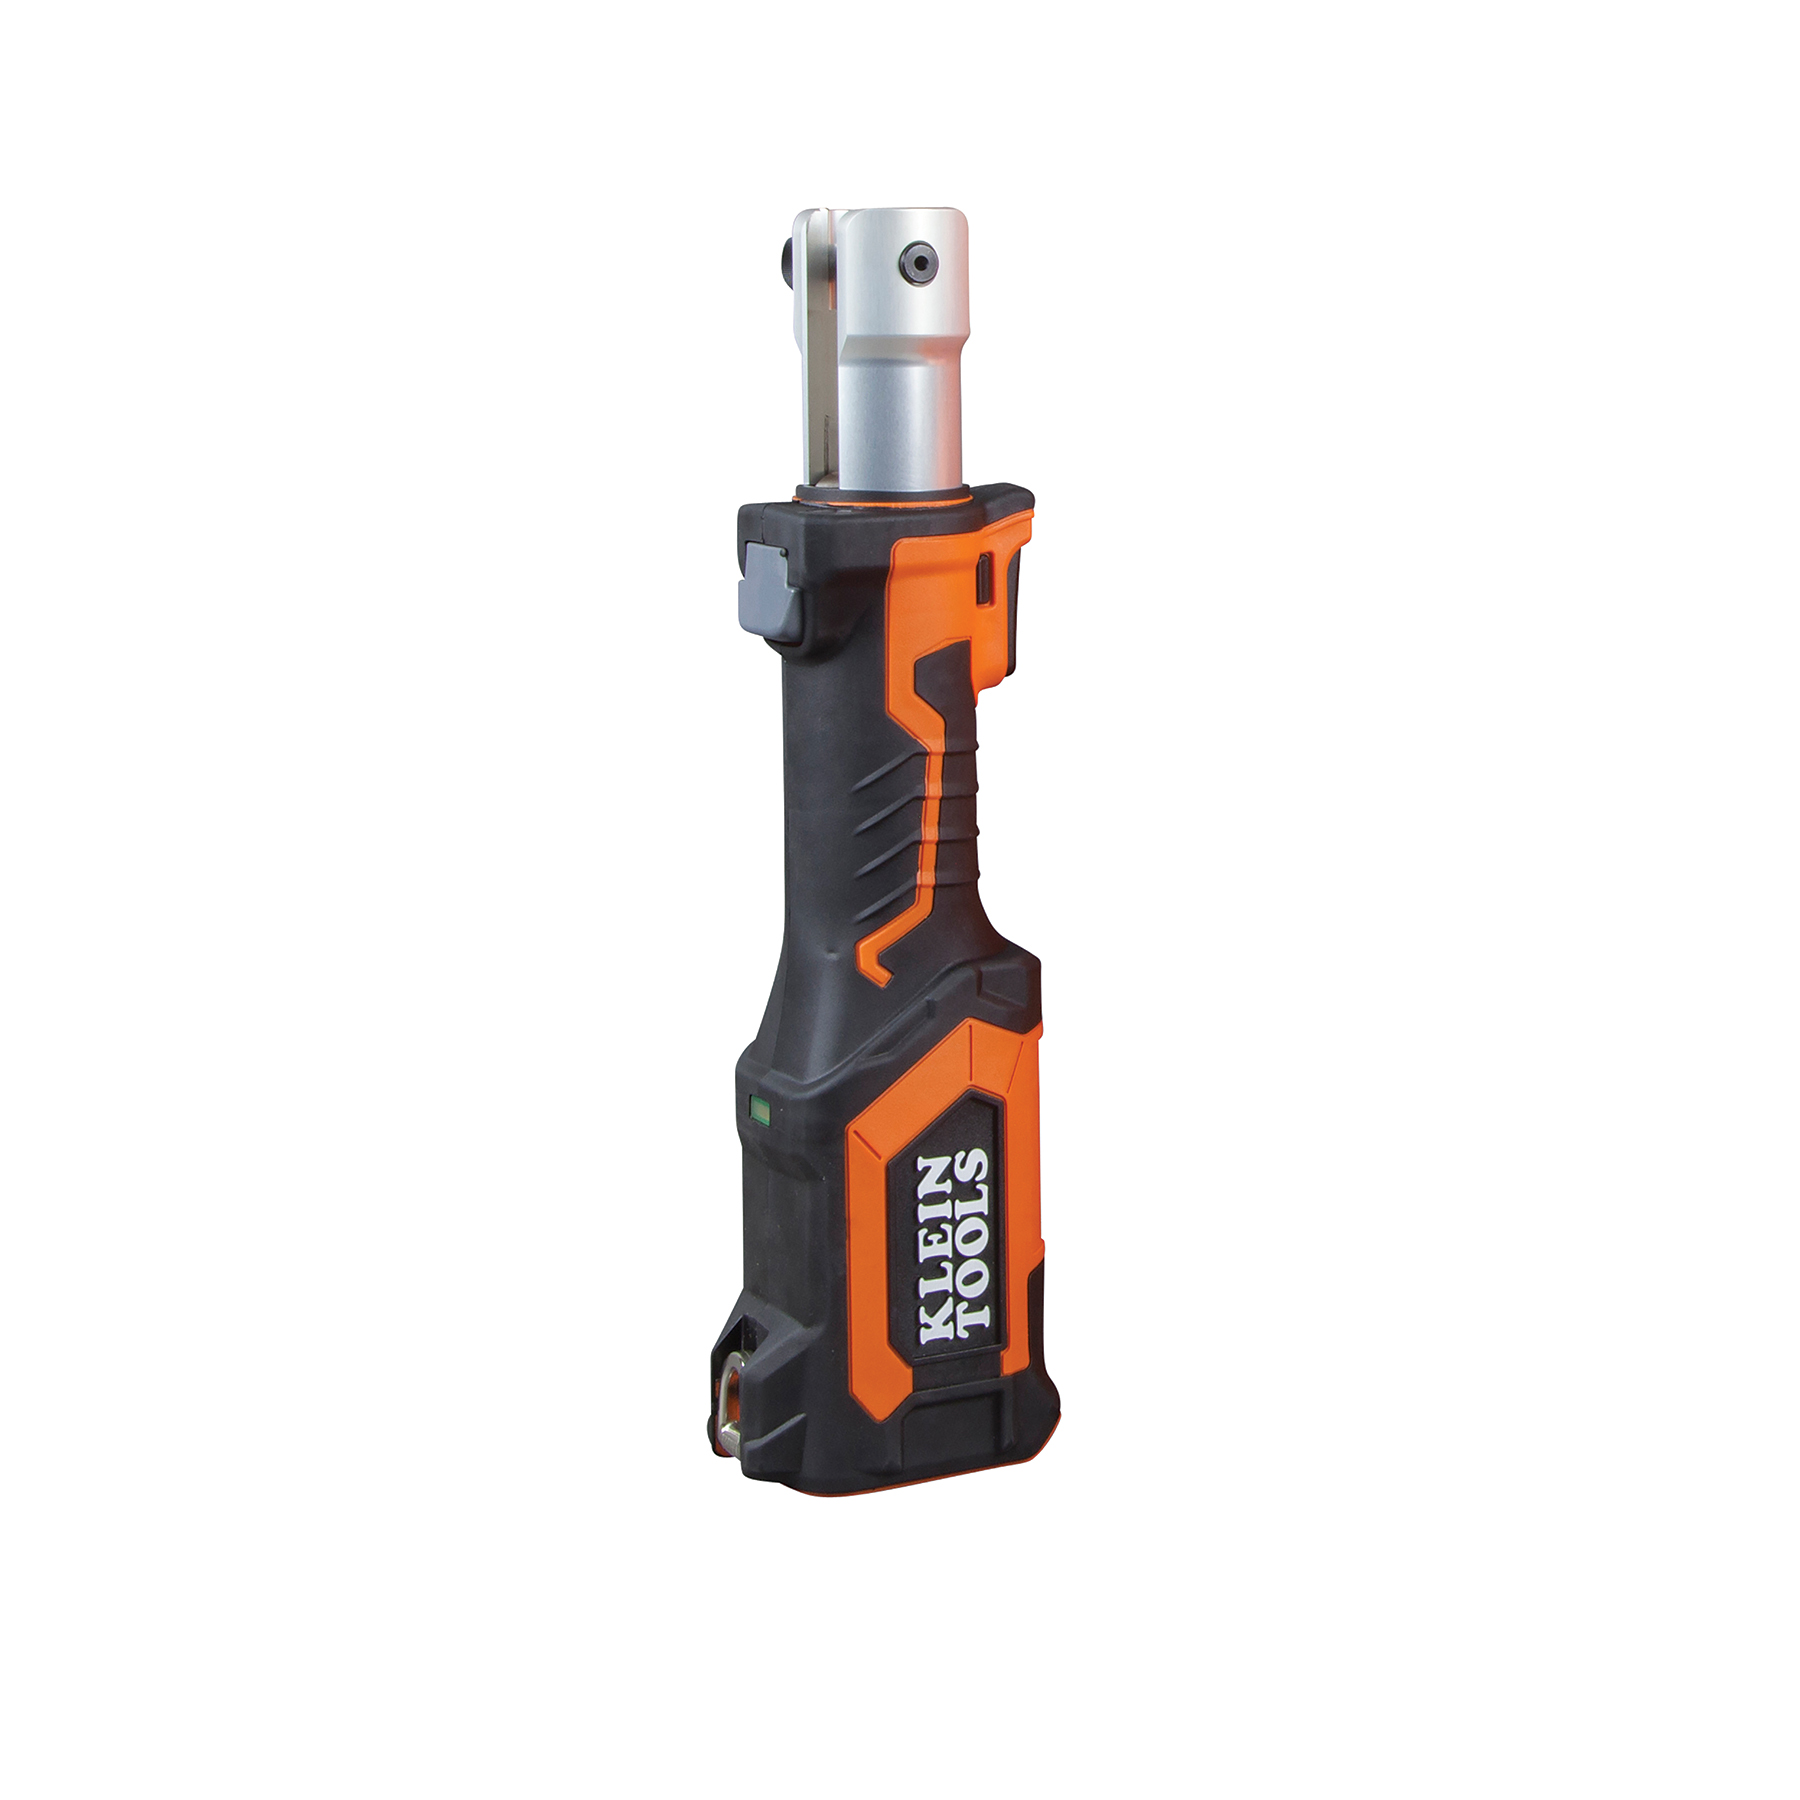 Tool bat. Hydraulic crimping heads HHY-200t. Battery operated head Cord Cutter Beading.